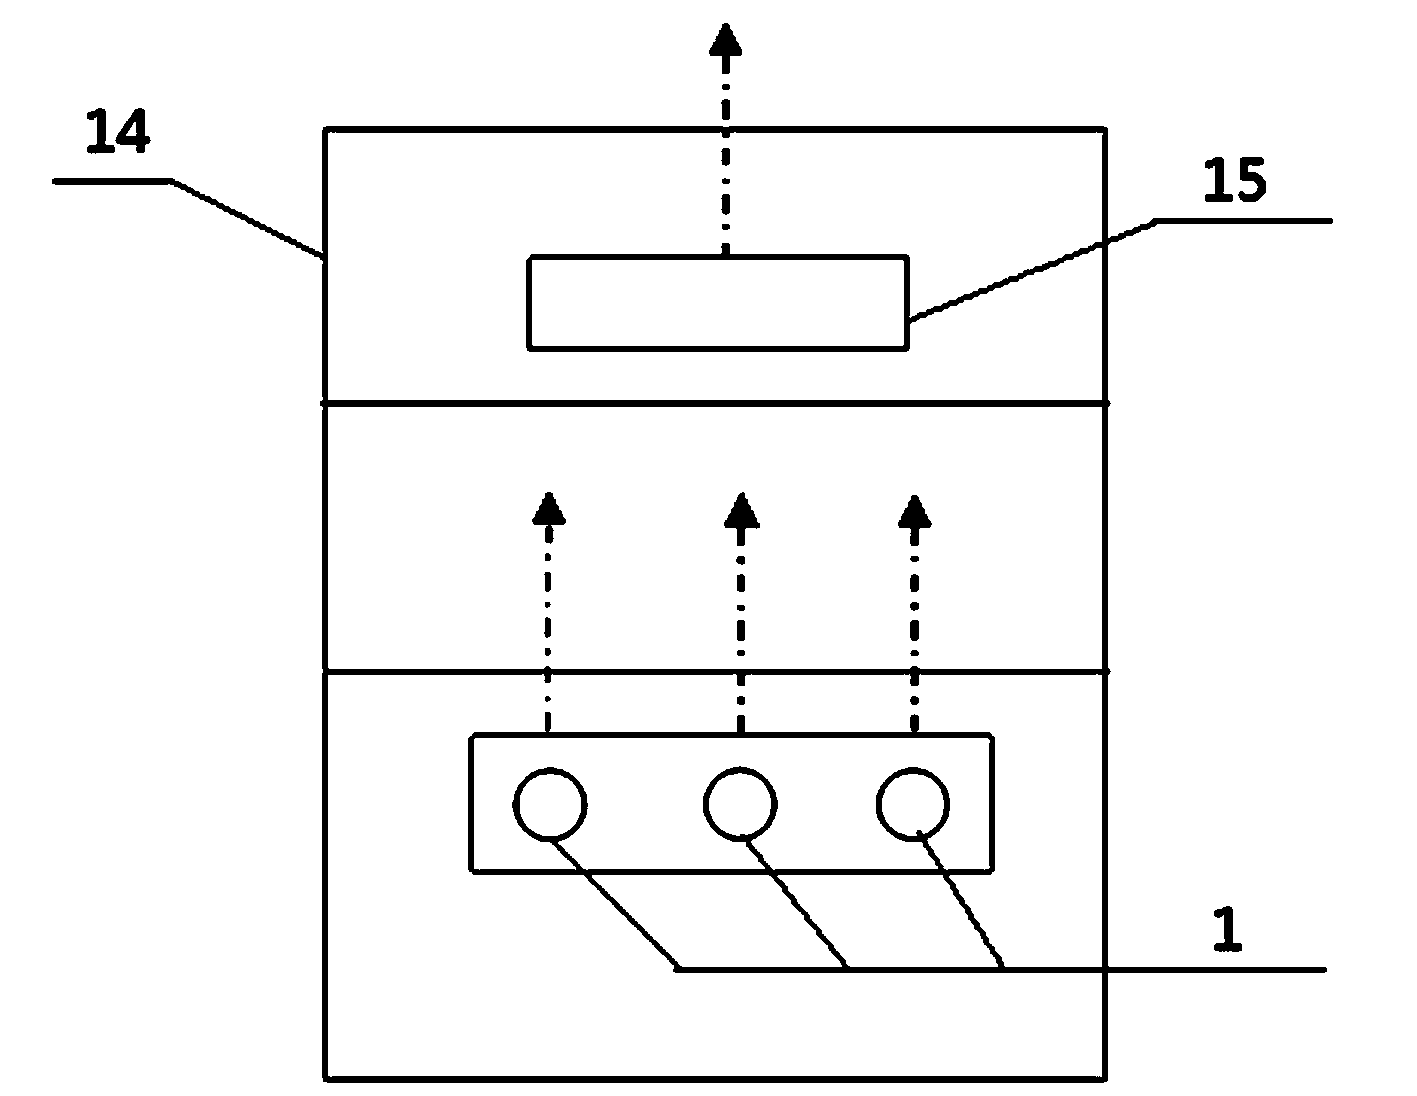 On-line temperature measuring device for monitoring connecting portion between ring main unit and 10 kV cable head